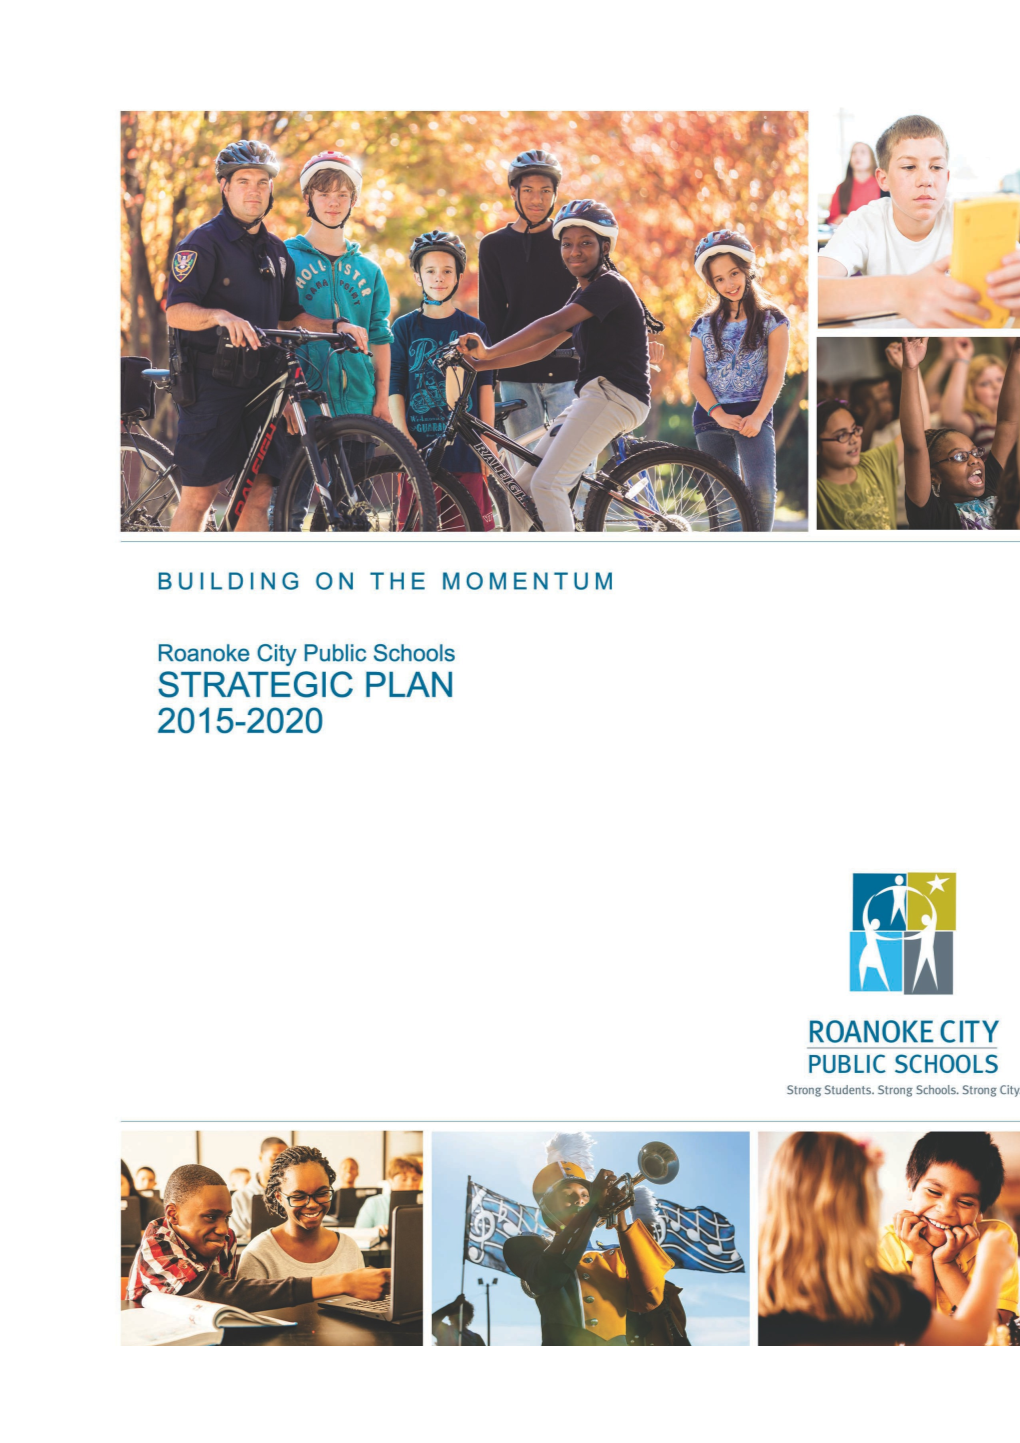 The 2015-2020 Strategic Plan Is Based on the Continued Philosophy That All Students Can